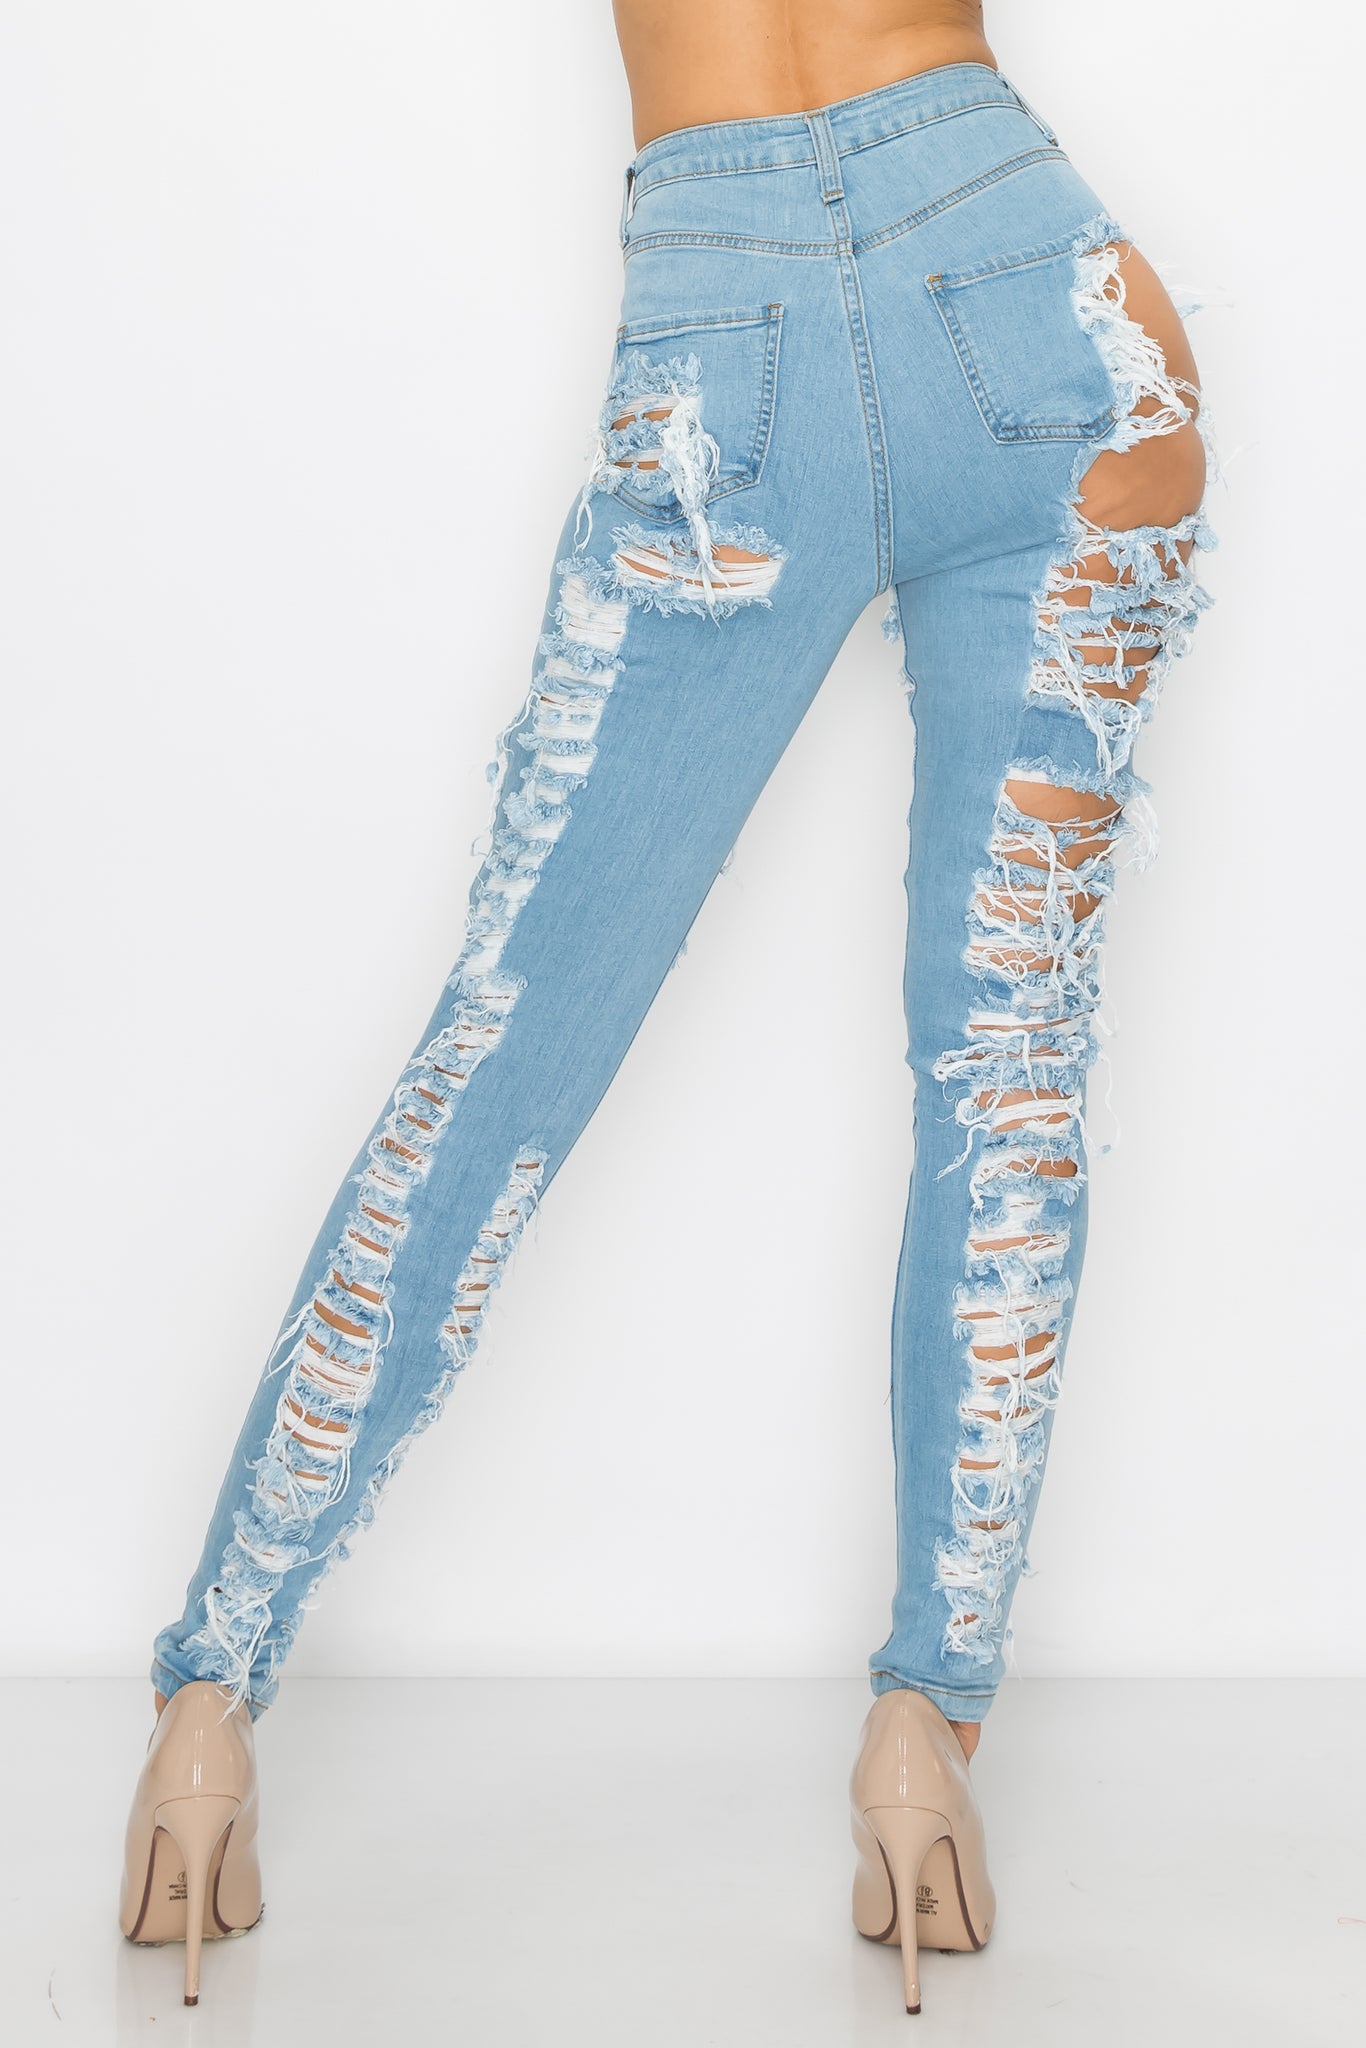 Aphrodite Super High Waisted Distressed Skinny Jeans with Cut Outs –  Aphrodite Jeans